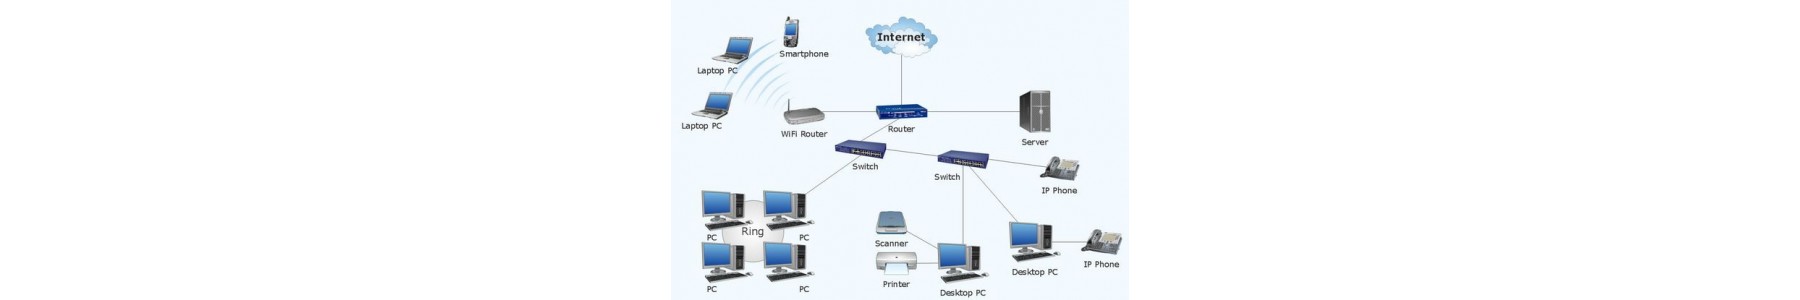 Networking products | Wifi/3G Boosters, Adapters and Extenders